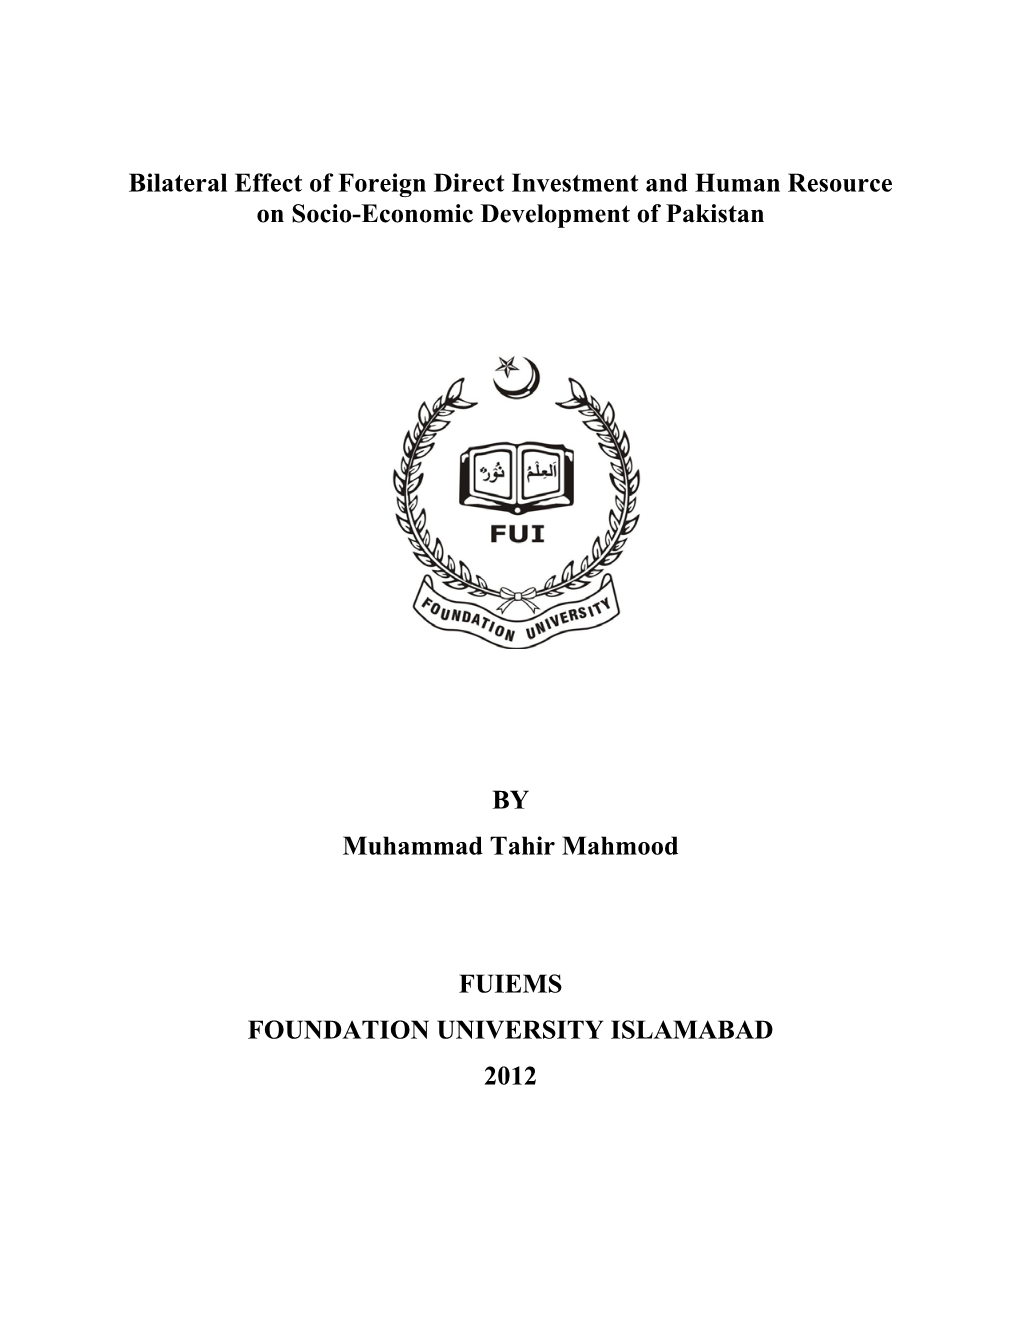 Bilateral Effect of Foreign Direct Investment and Human Resource on Socio-Economic Development of Pakistan